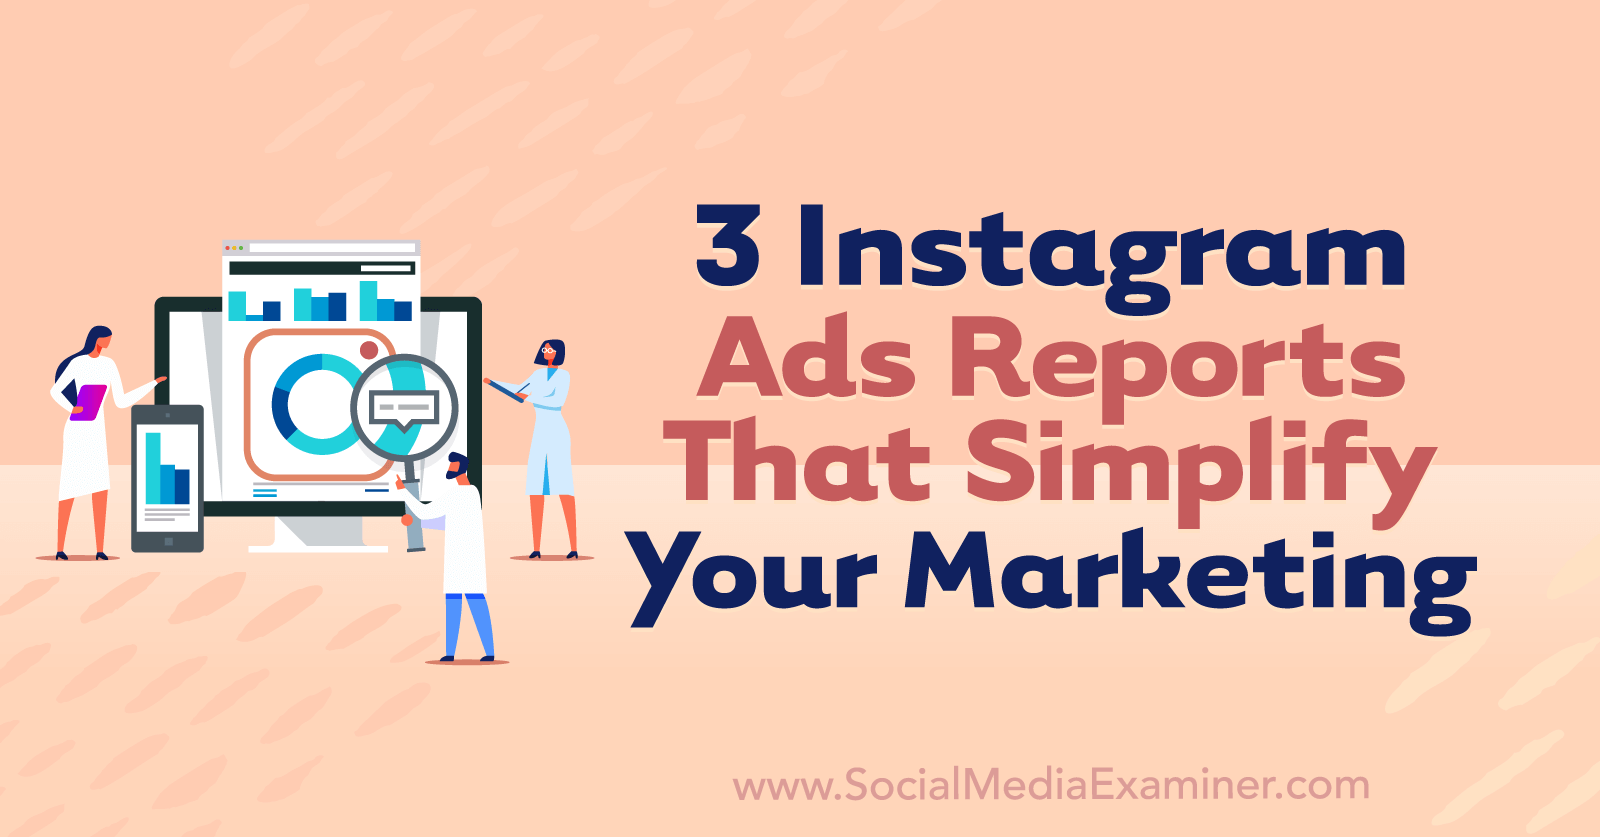 3 Instagram Ads Reports That Simplify Your Marketing by Anna Sonnenberg on Social Media Examiner.